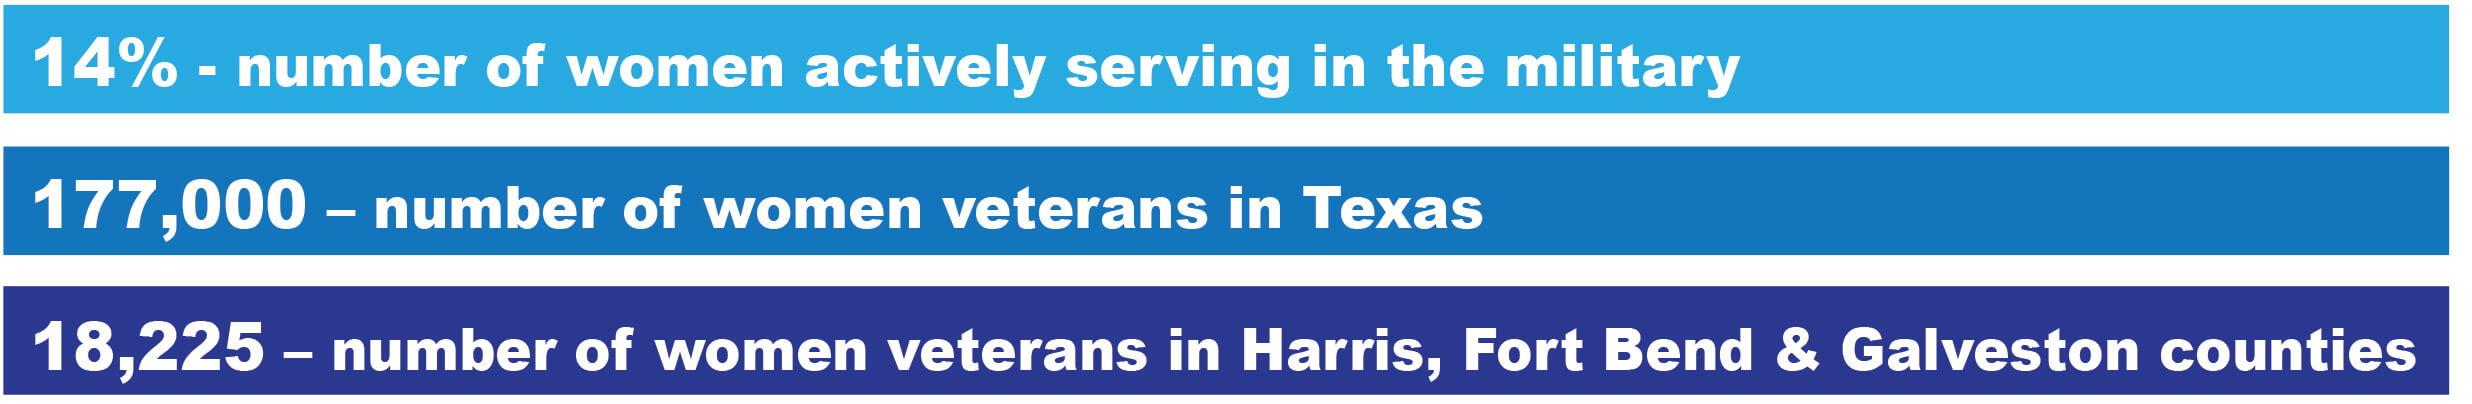 Number of women veterans in Texas and Houston area